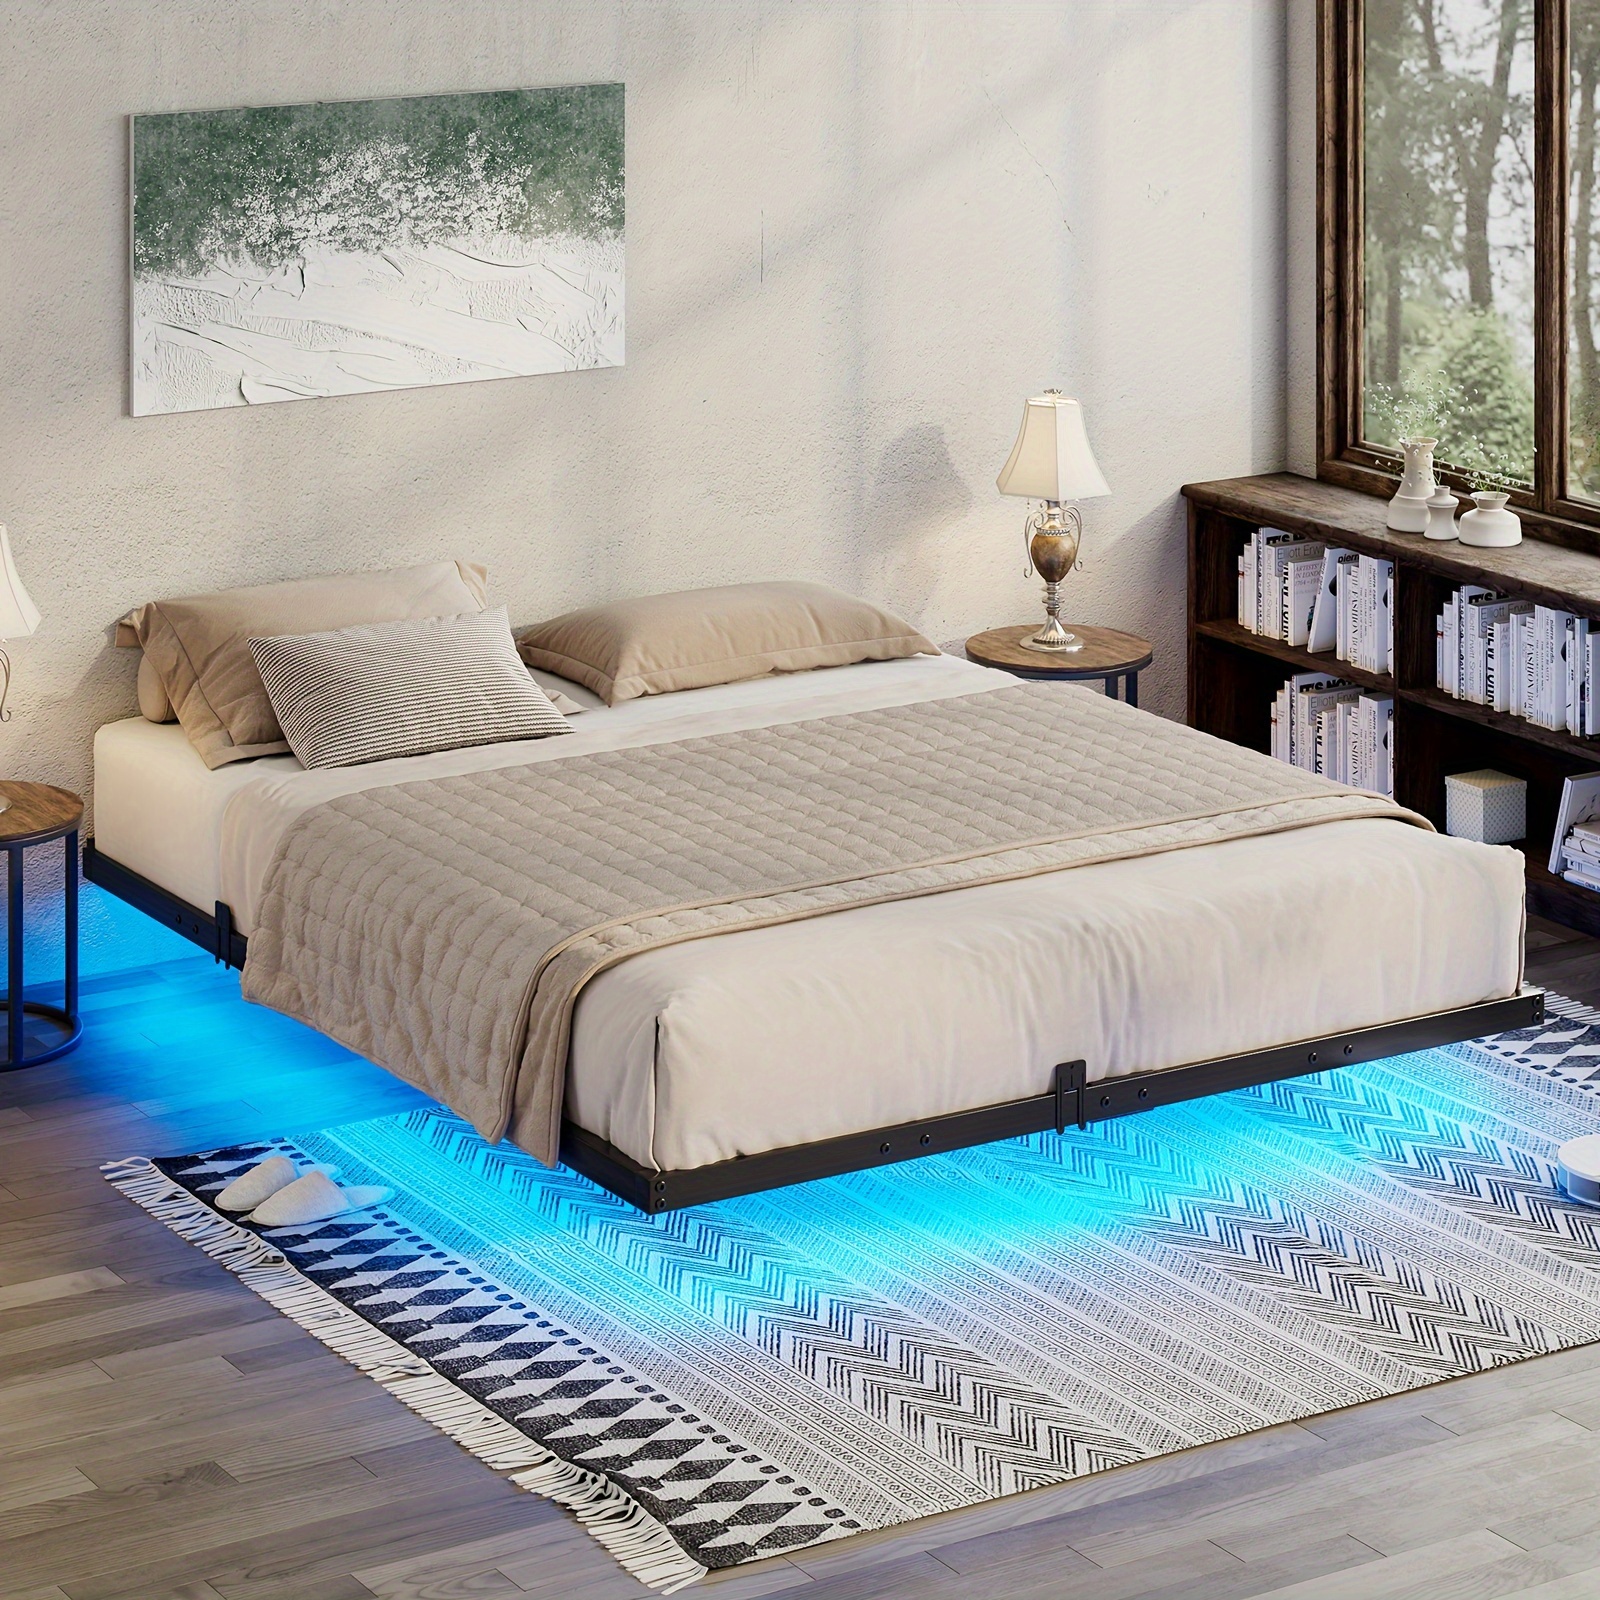 

Floating Bed Frame With Rgbw Led Light, Modern Metal Platform Bed With Steel Slat Support/heavy Duty/no Box Spring Needed/noise-free